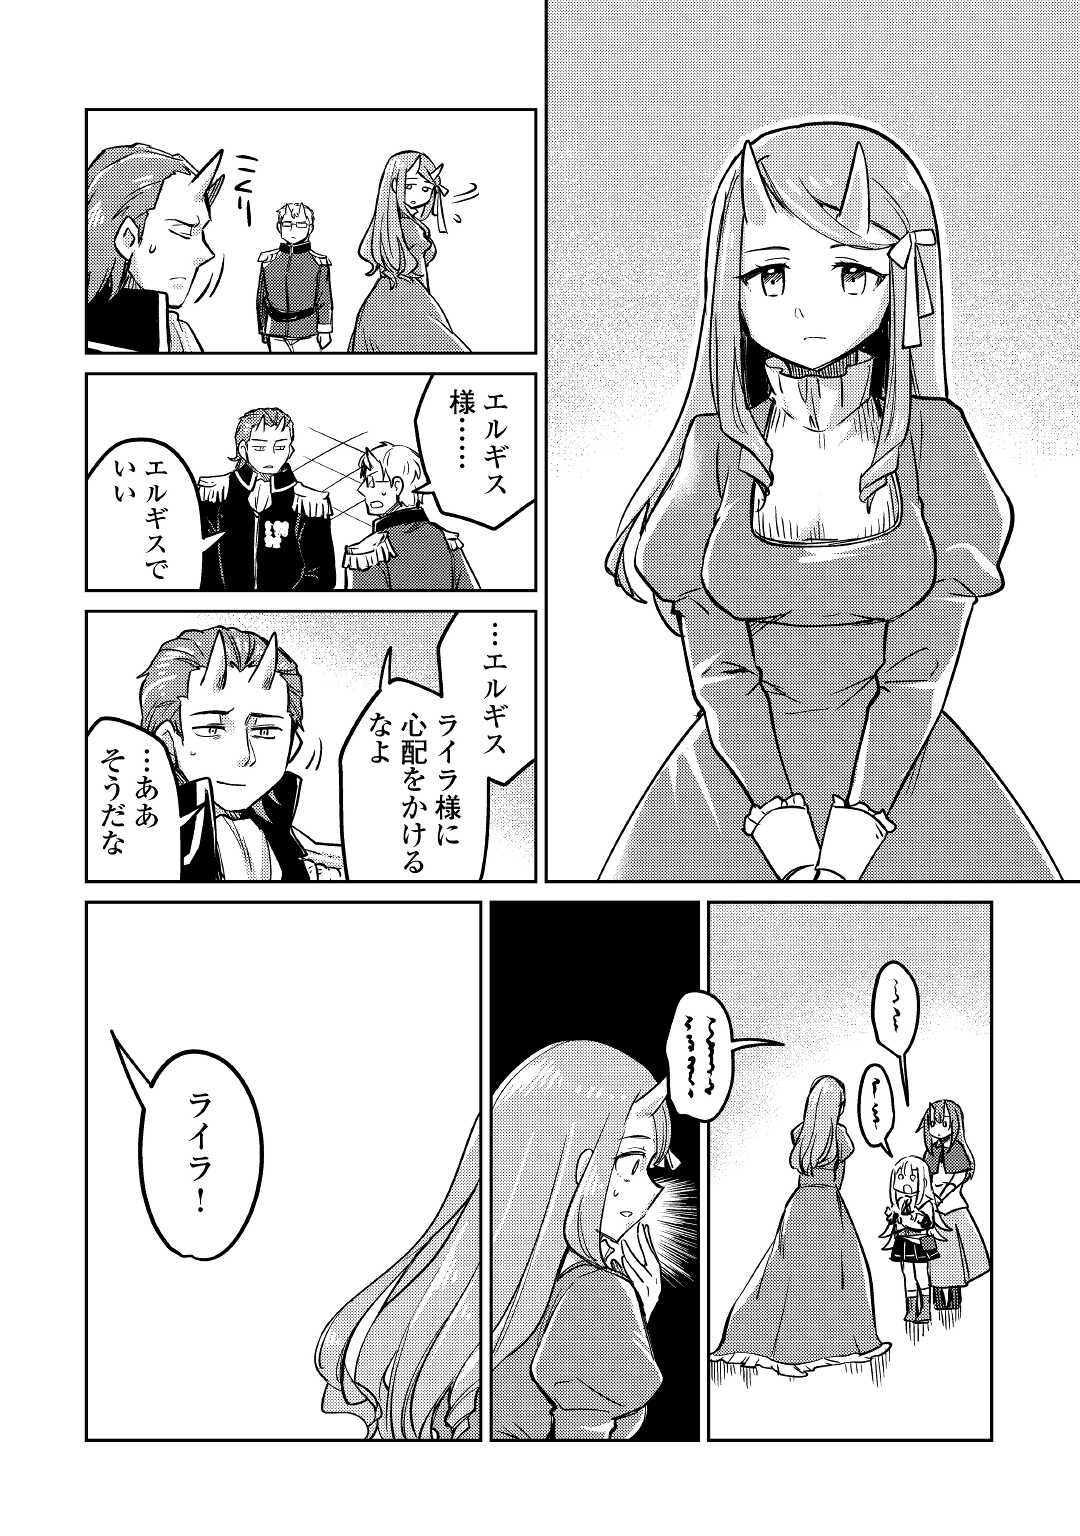 The Former Structural Researcher’s Story of Otherworldly Adventure 第40話 - Page 16